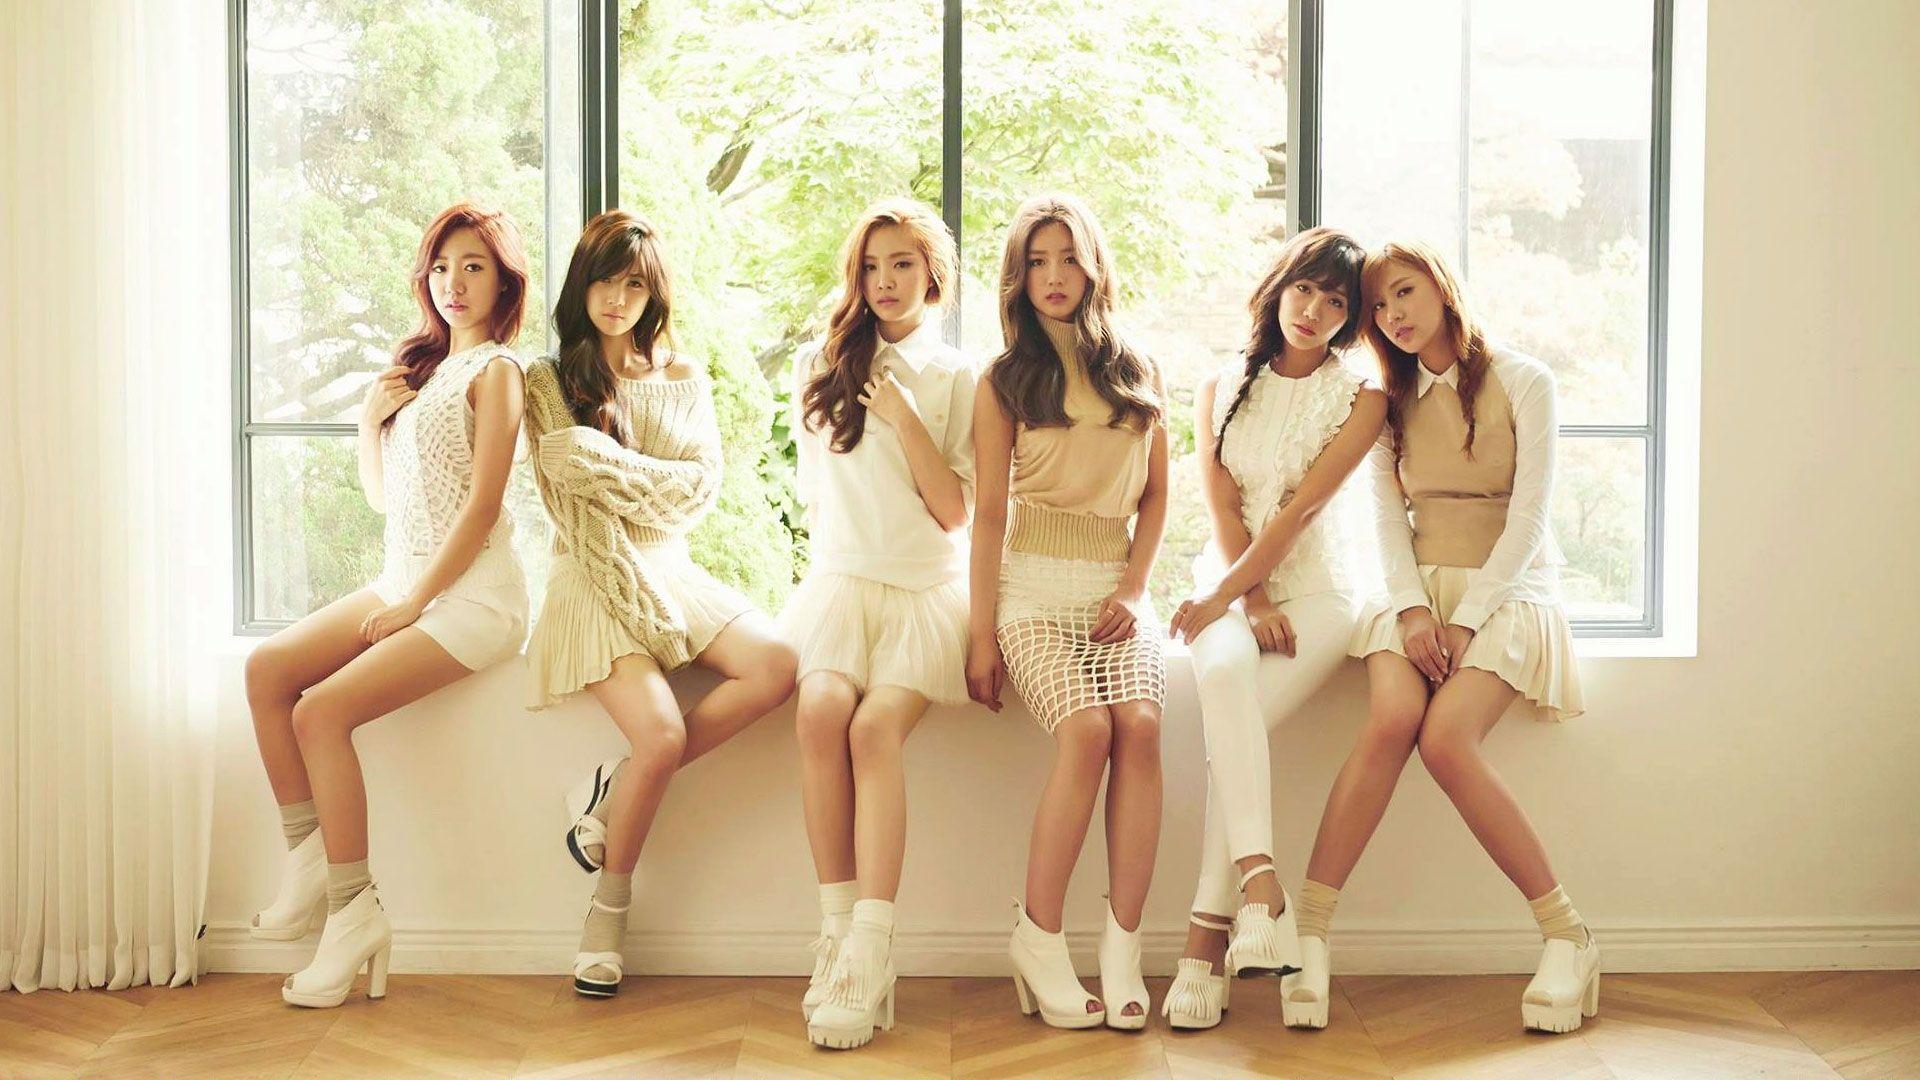 Apink Wallpapers Top Free Apink Backgrounds Wallpaperaccess